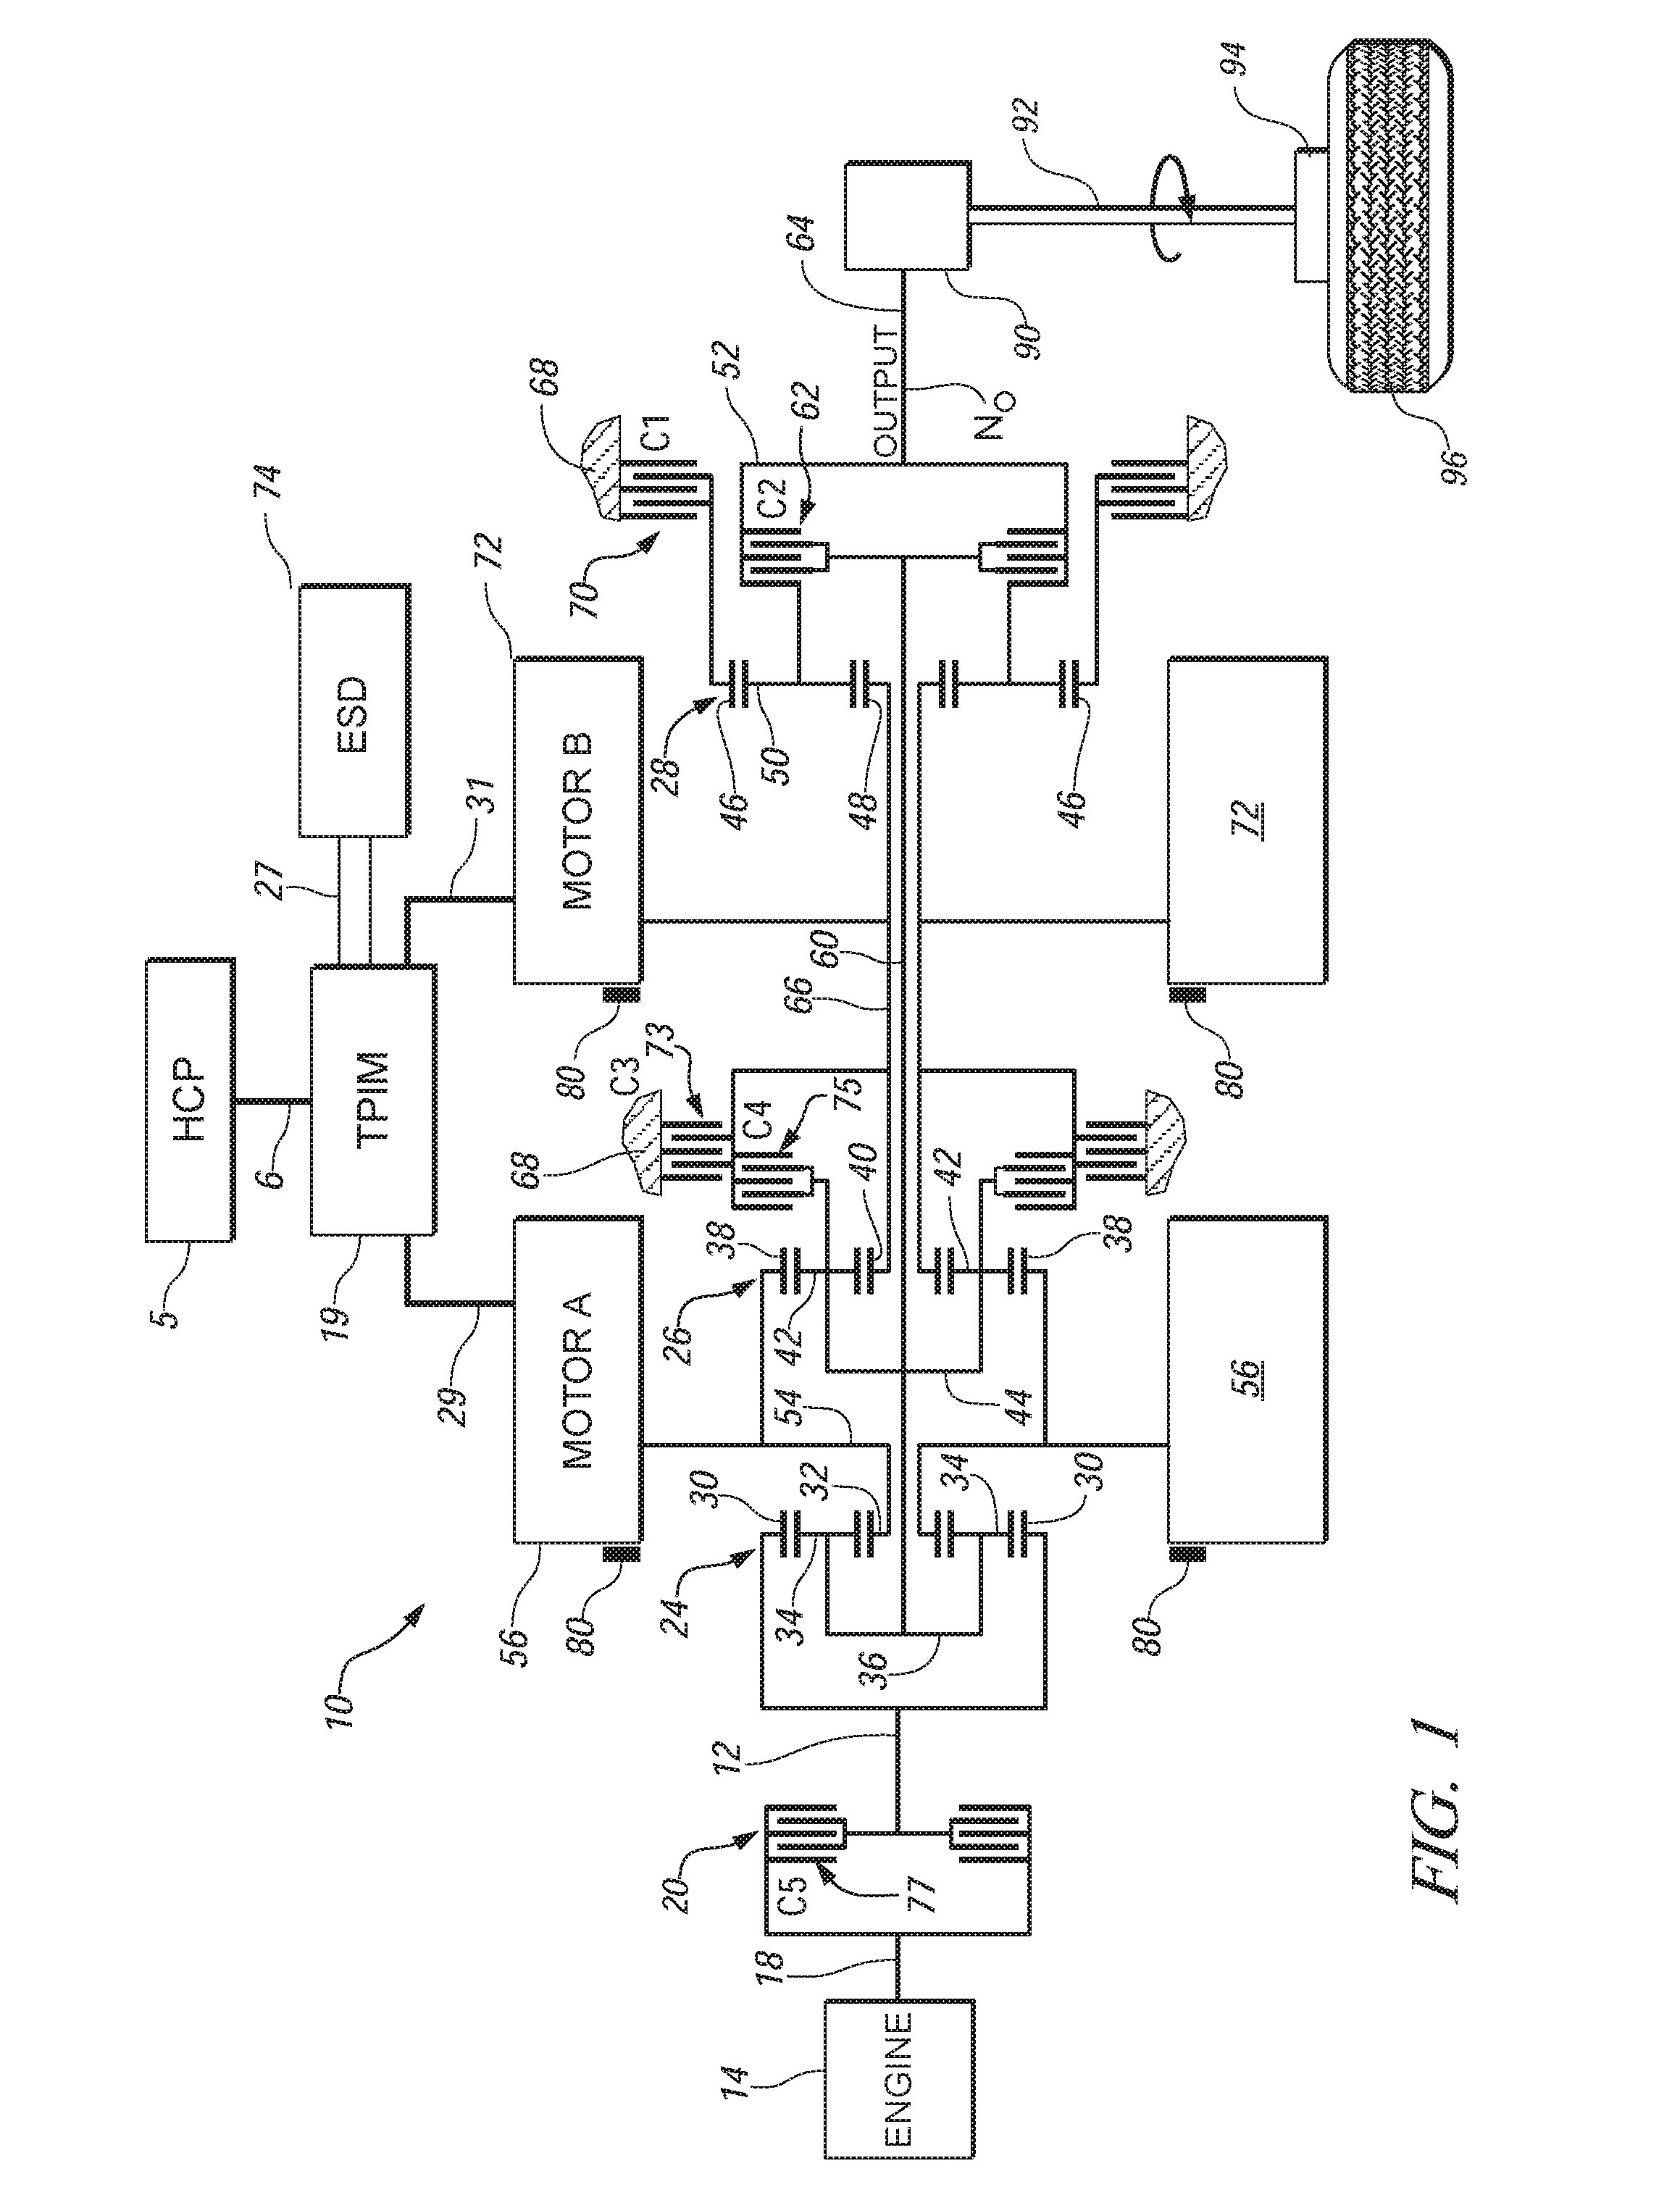 Method and apparatus to determine rotational position of an electrical machine